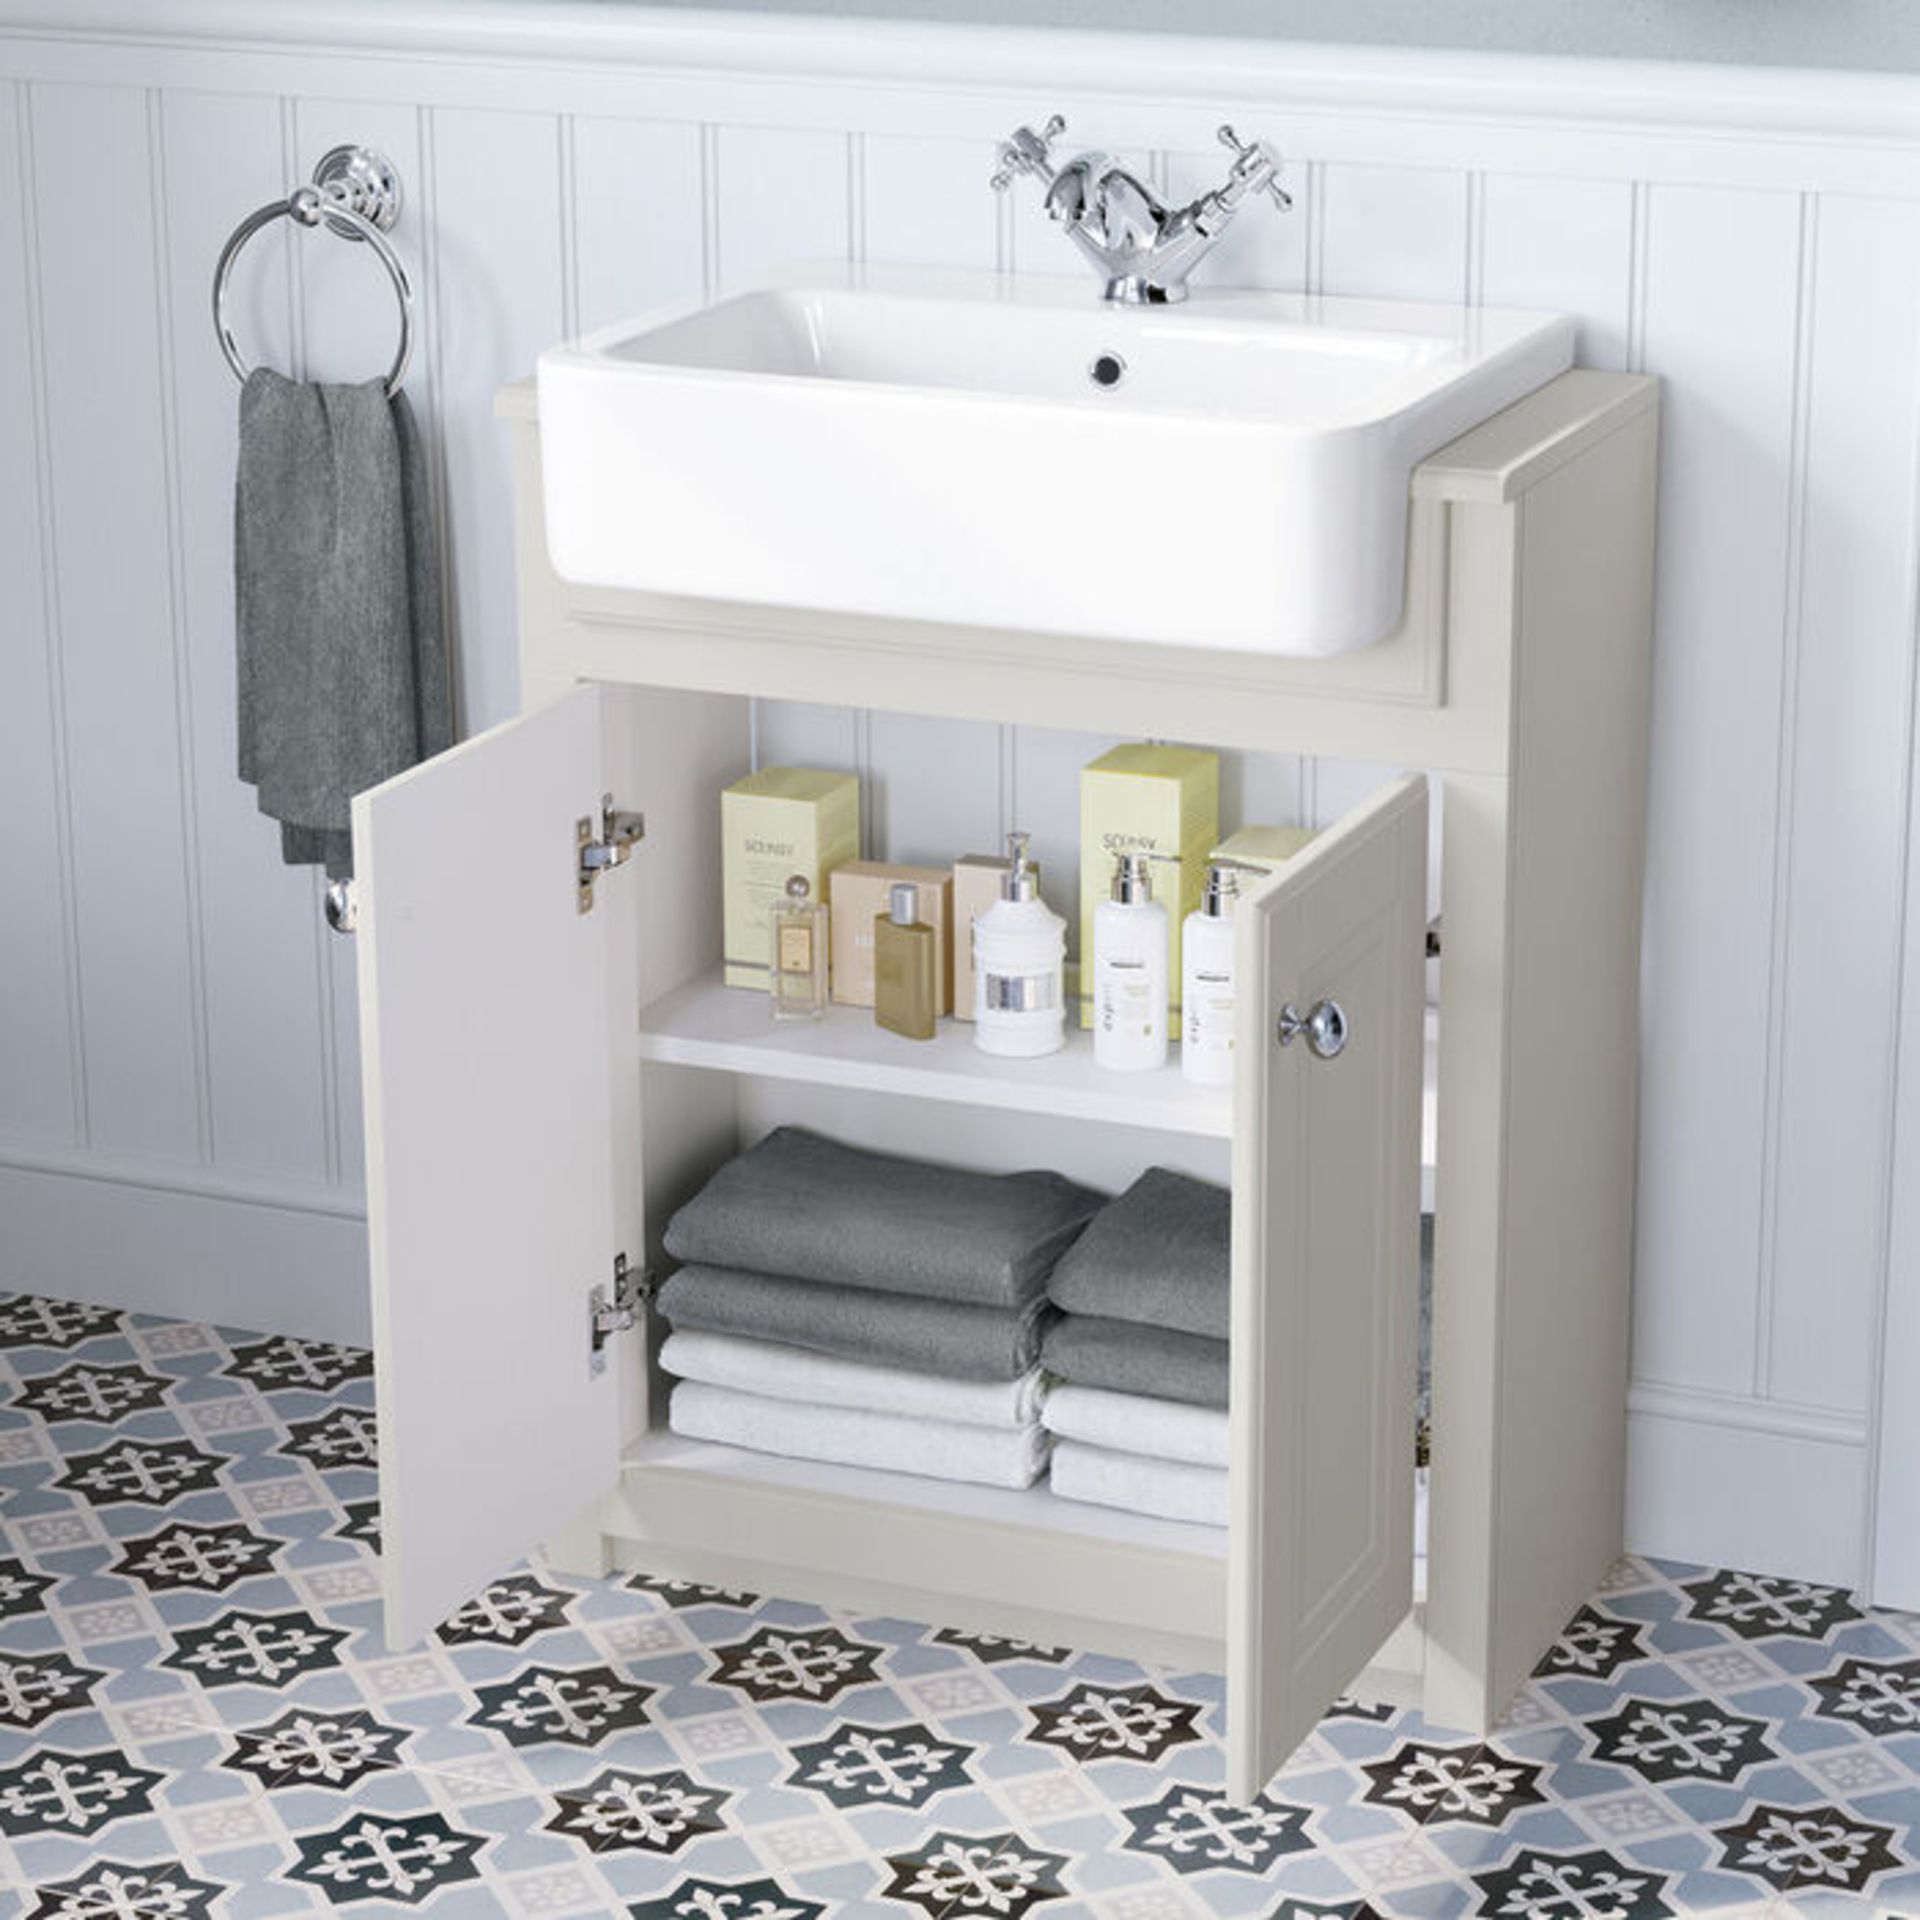 NEW & BOXED 667mm Cambridge Clotted Cream FloorStanding Sink Vanity Unit. RRP £749.99.Comes co... - Image 2 of 3